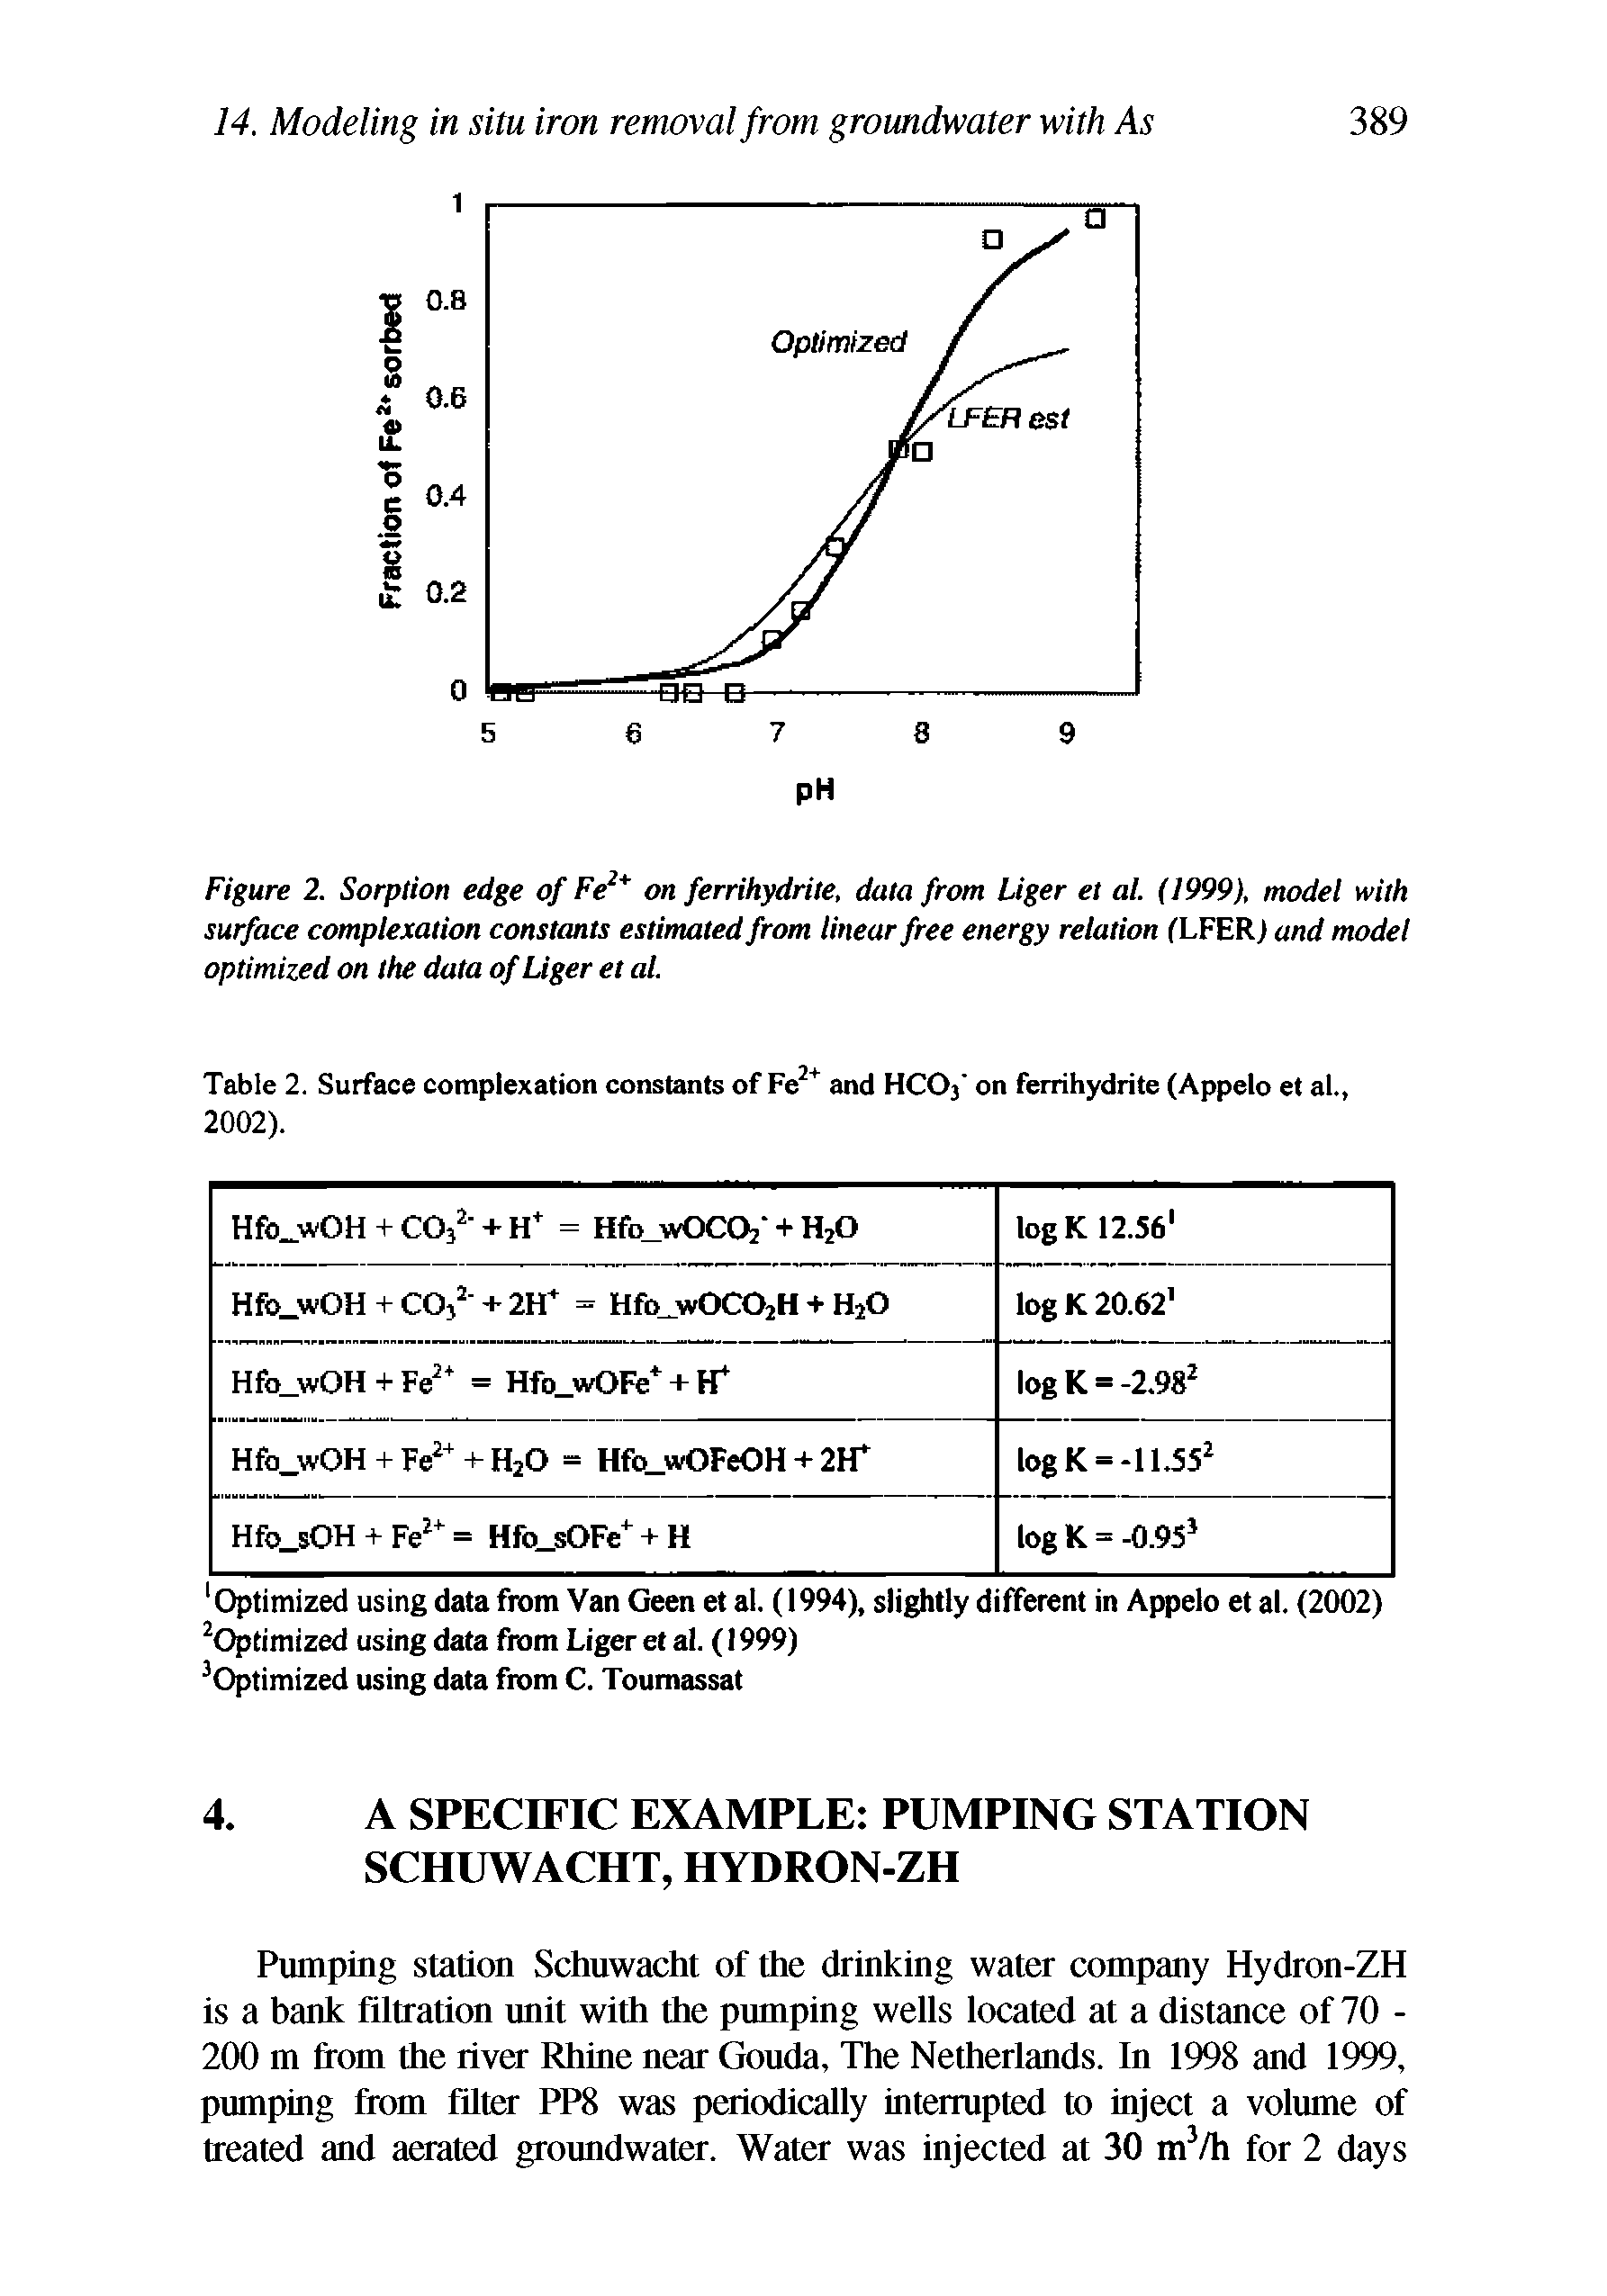 Figure 2. Sorption edge of Fe on ferrihydrite, data from Liger et at. (1999), model with surface complexation constants estimated from linear free energy relation fLFERj and model optimized on the data of Liger et al.